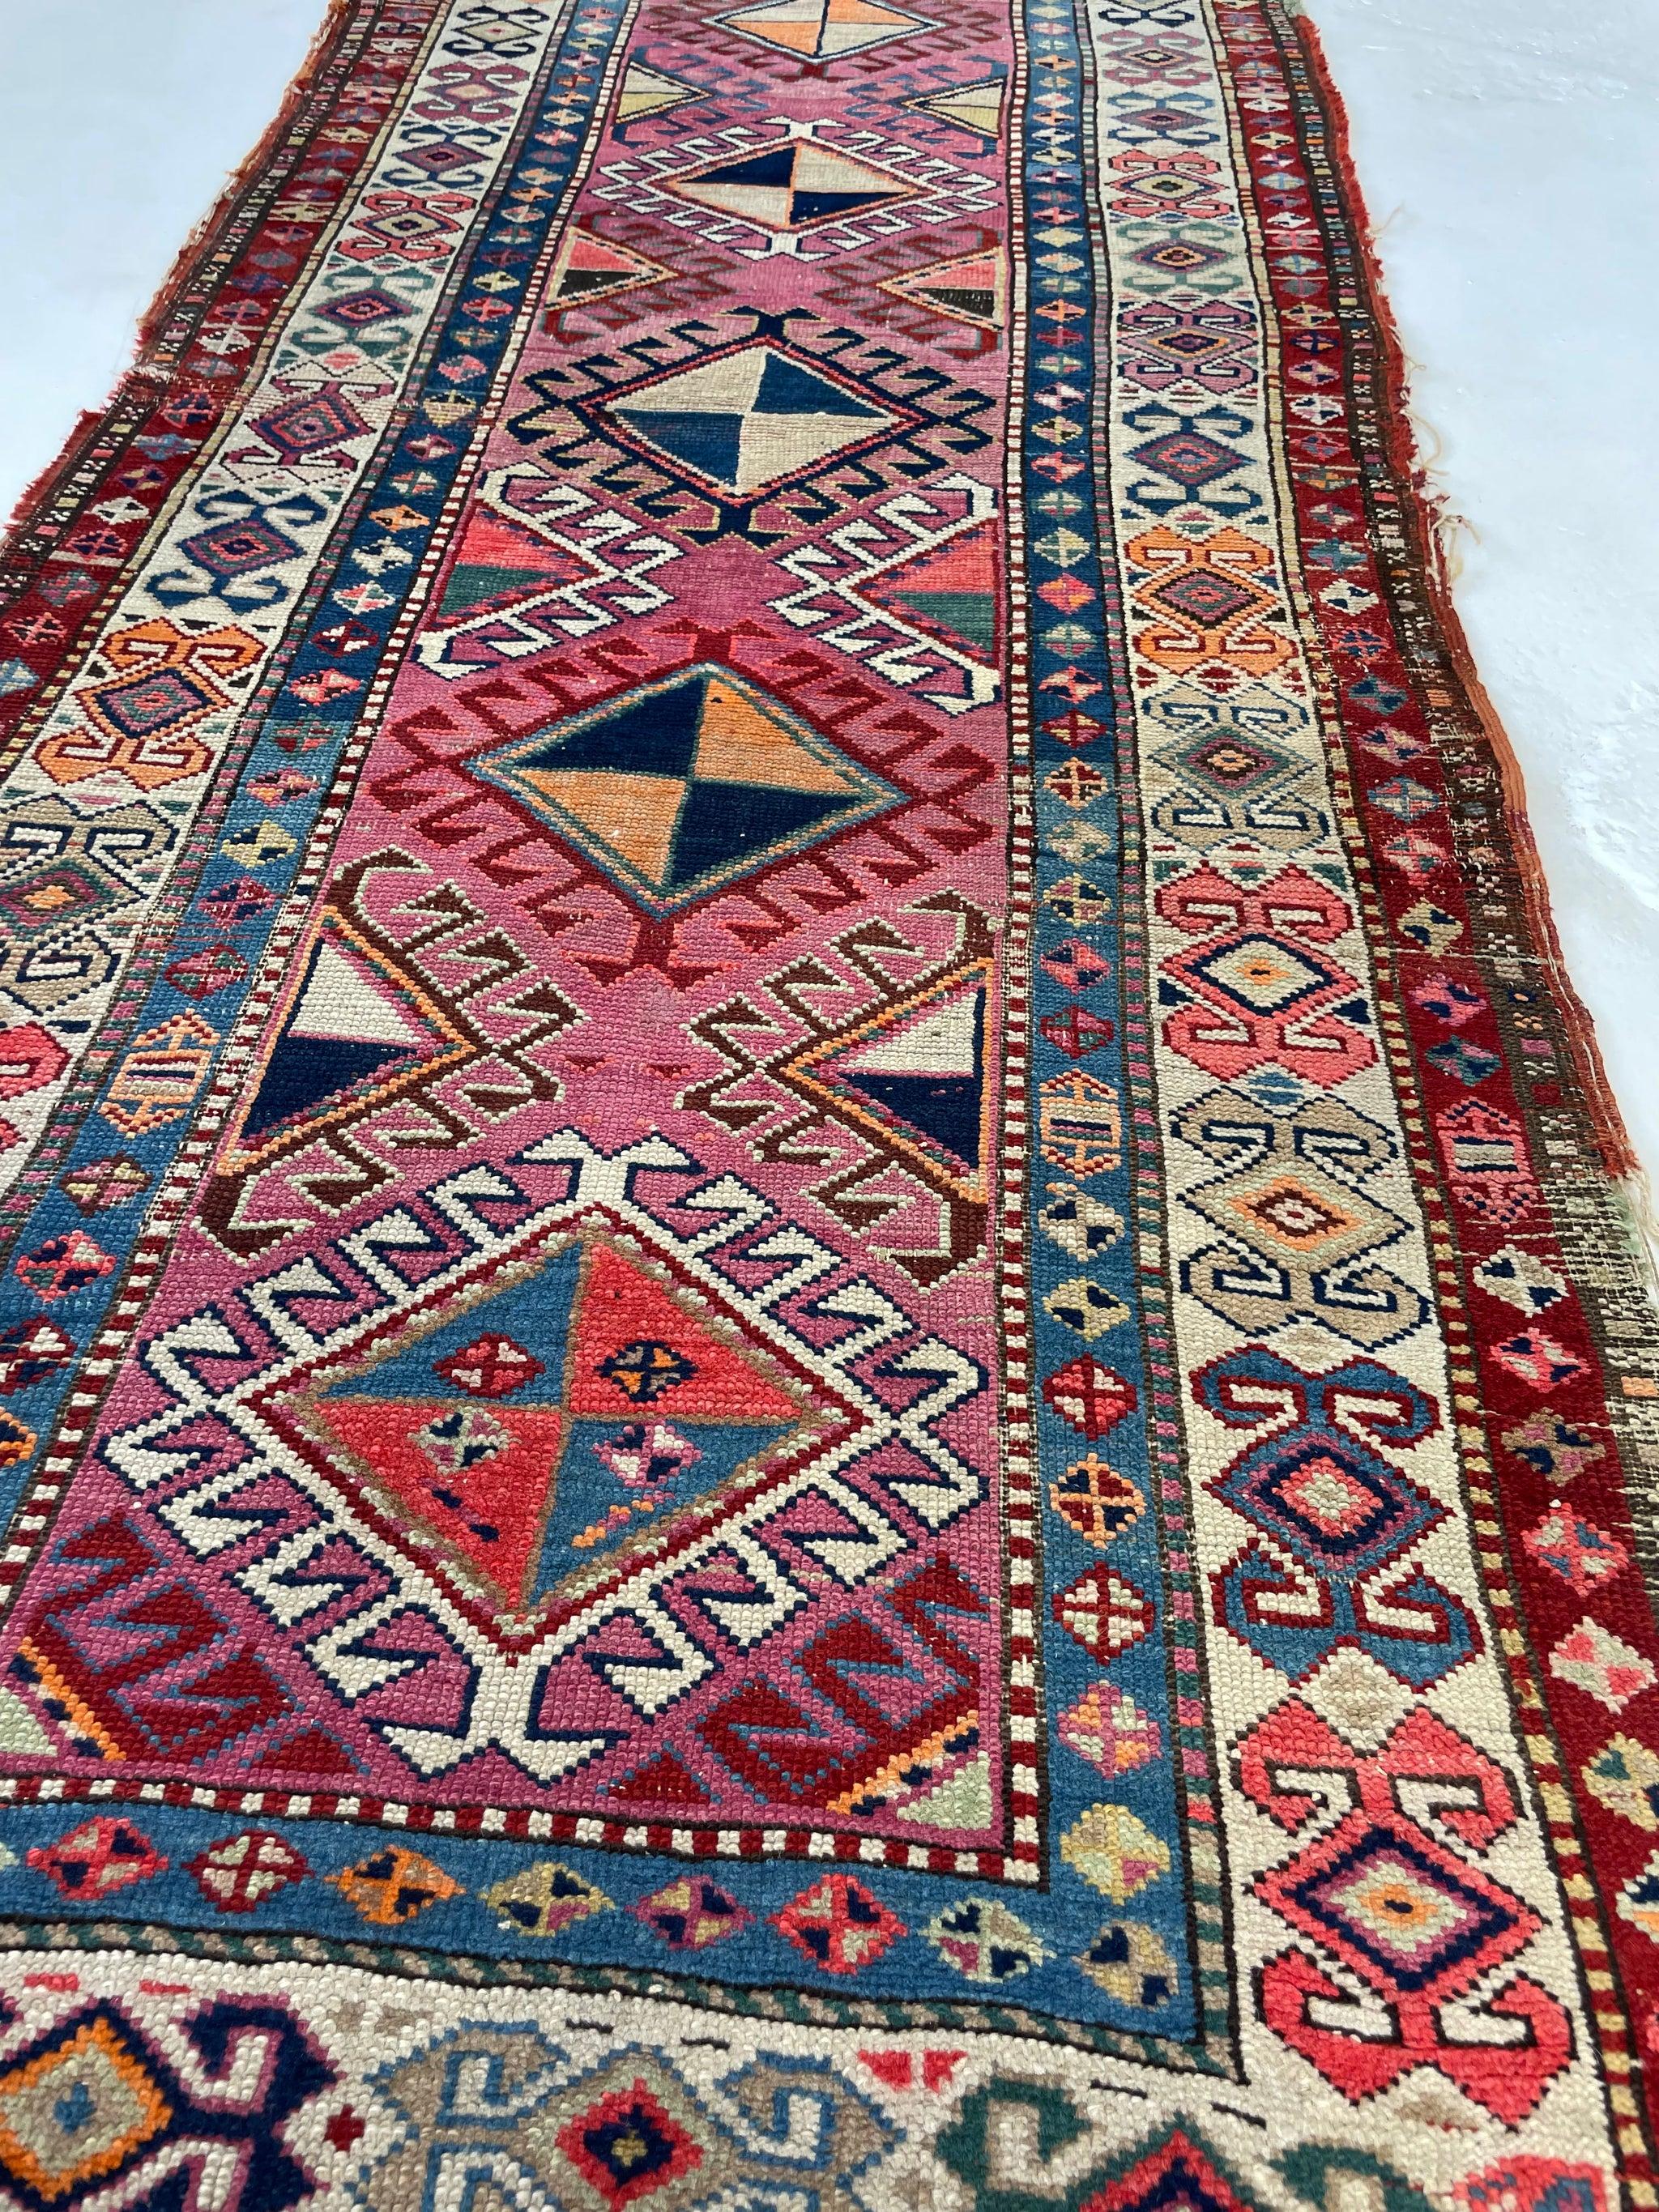 Maybe the Most Beautiful runner Ever? Sunset Colors Antique Caucasian Shield Medallion with Akimbo Border

About: Rare sunset color palette and just a true tribal village piece with geometric motifs throughout that are all different sizes and